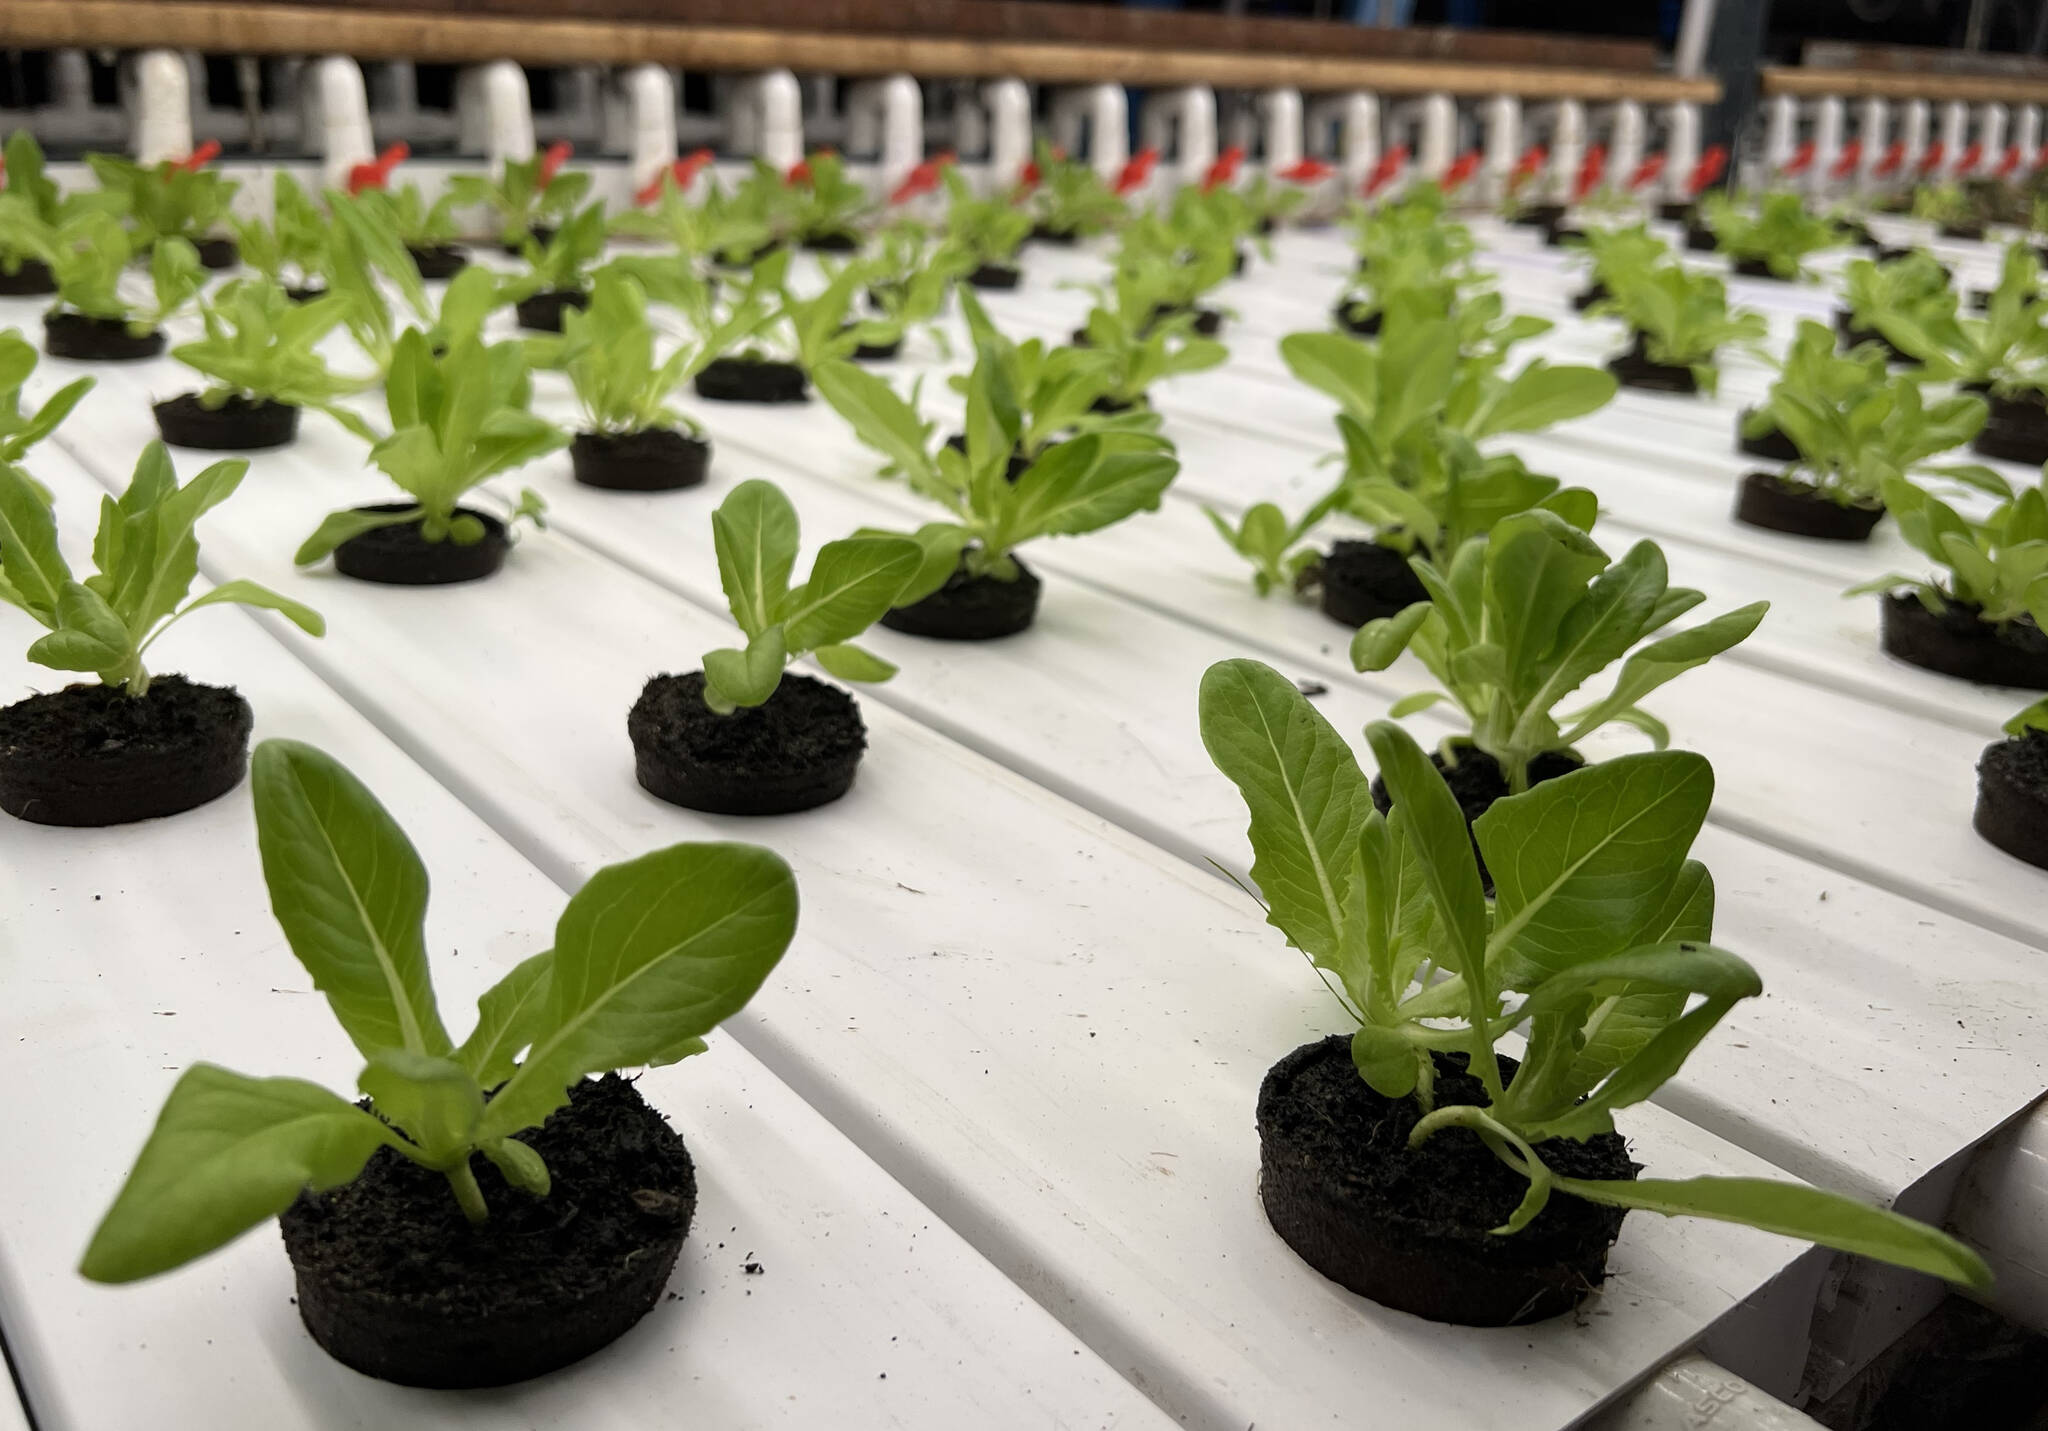 Plants growing in the hydroponics stacks.